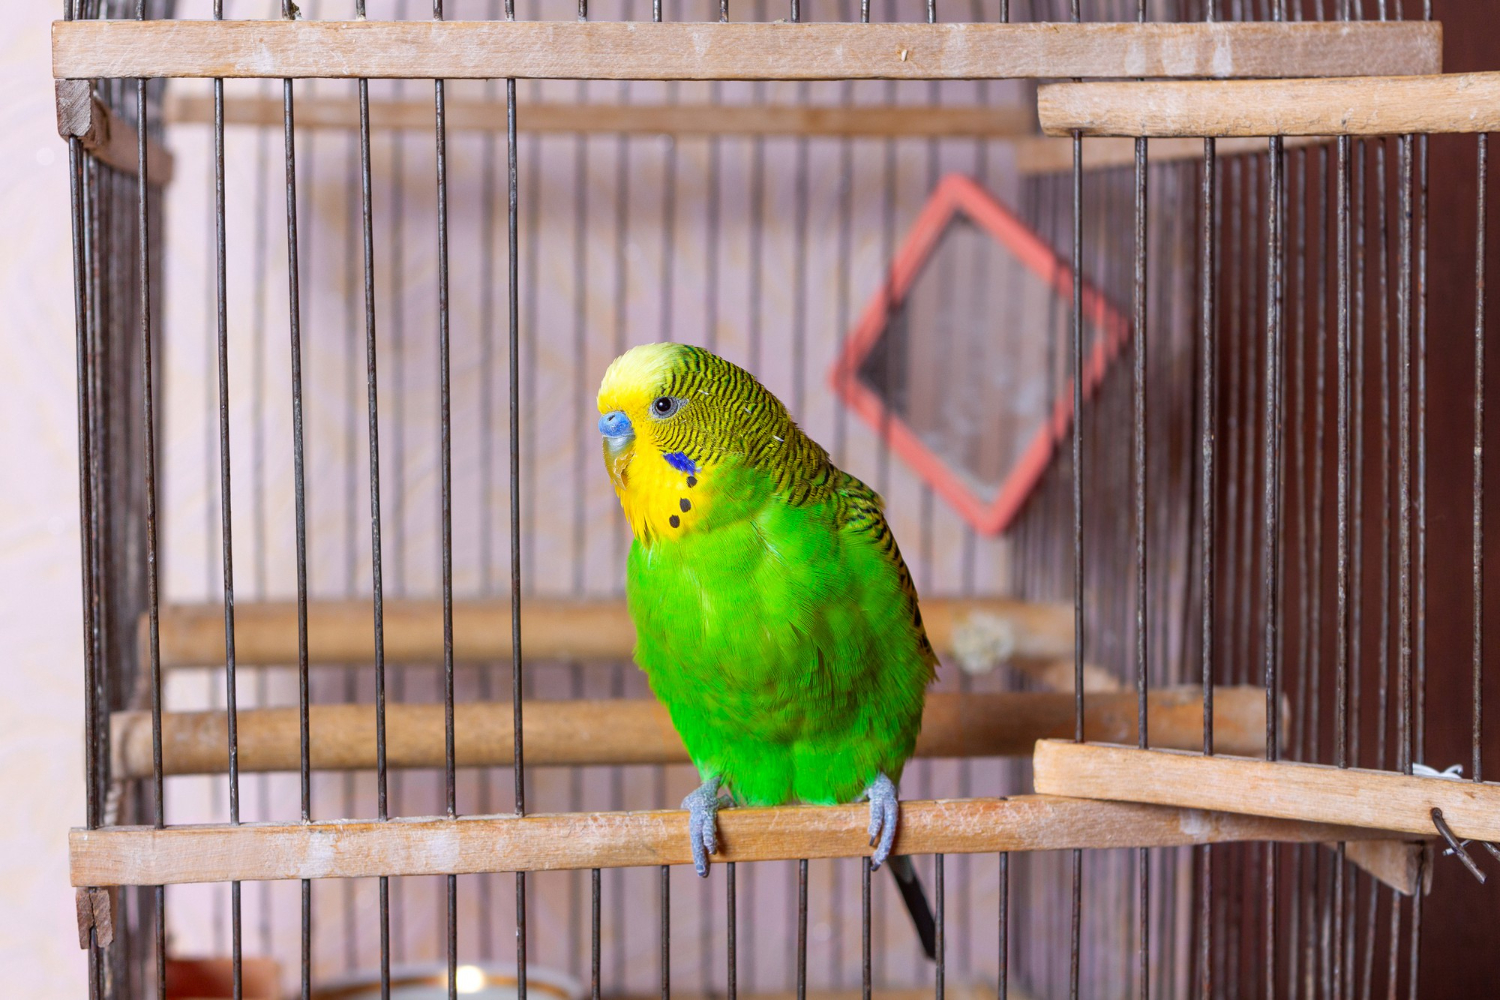 green budgerigar is sitting exit from cage caged mirror is visible keeping decorative bird house